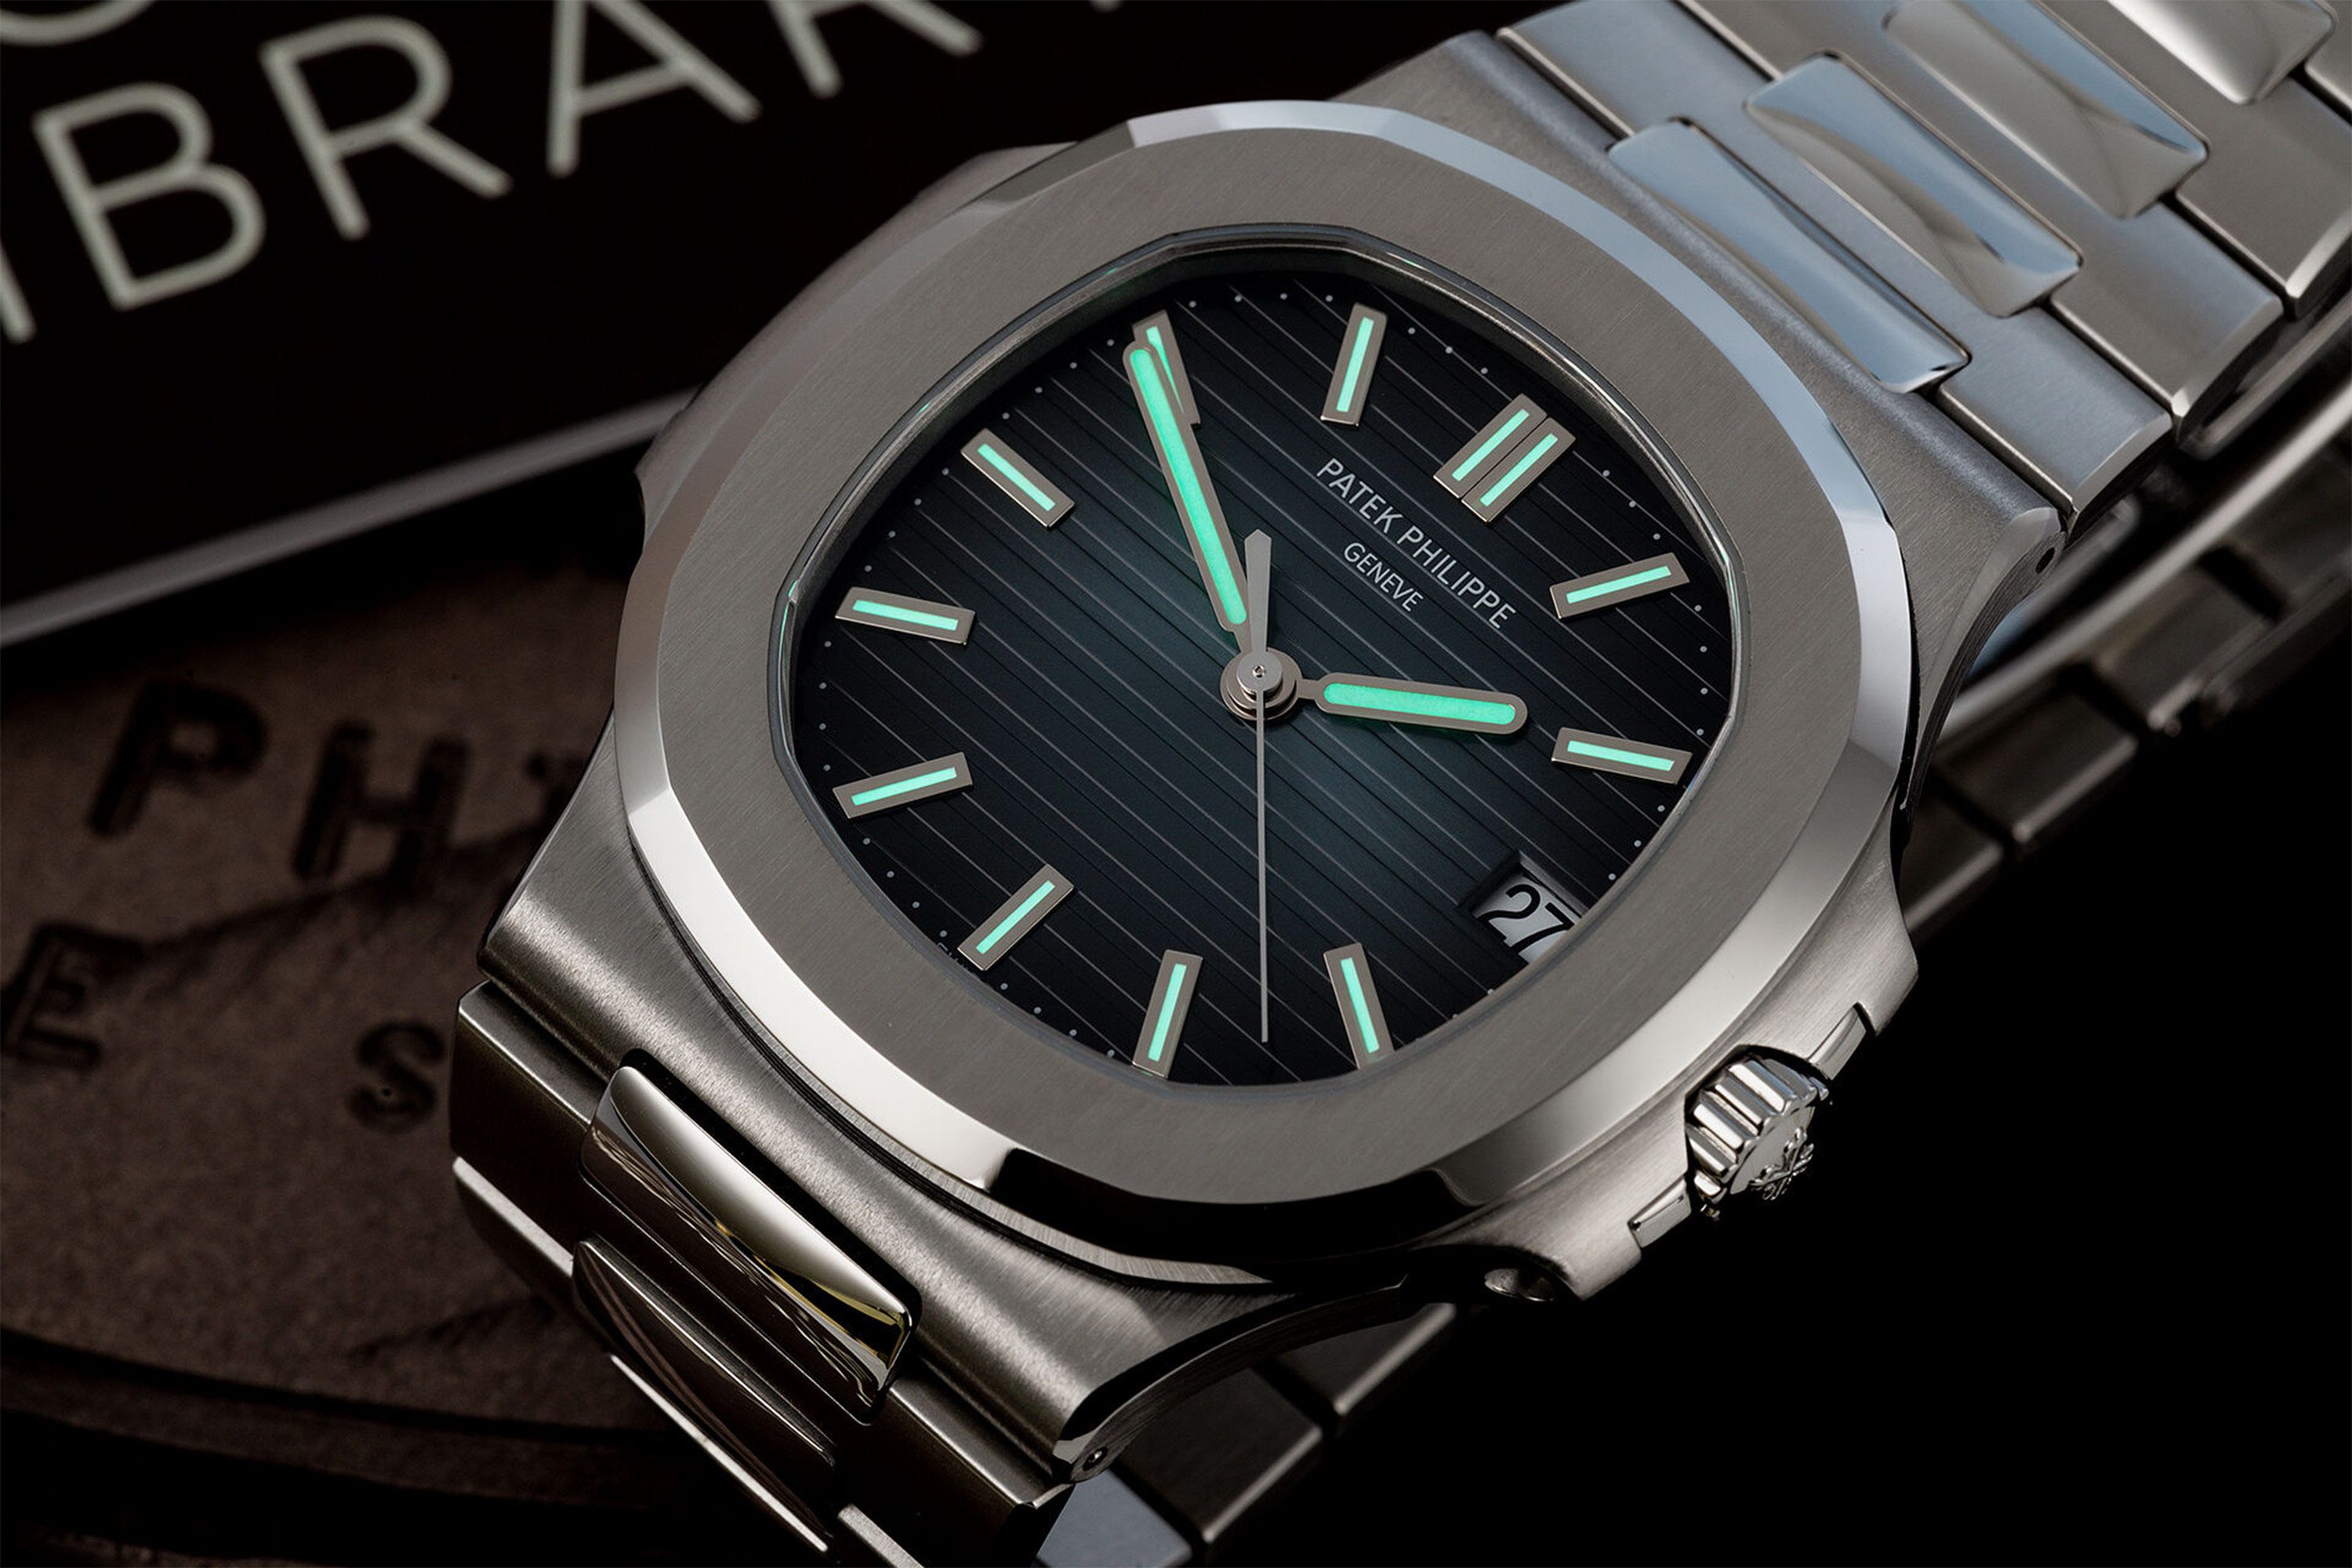 INTRODUCING: Four new Patek Philippe Nautilus references including two with  green dials